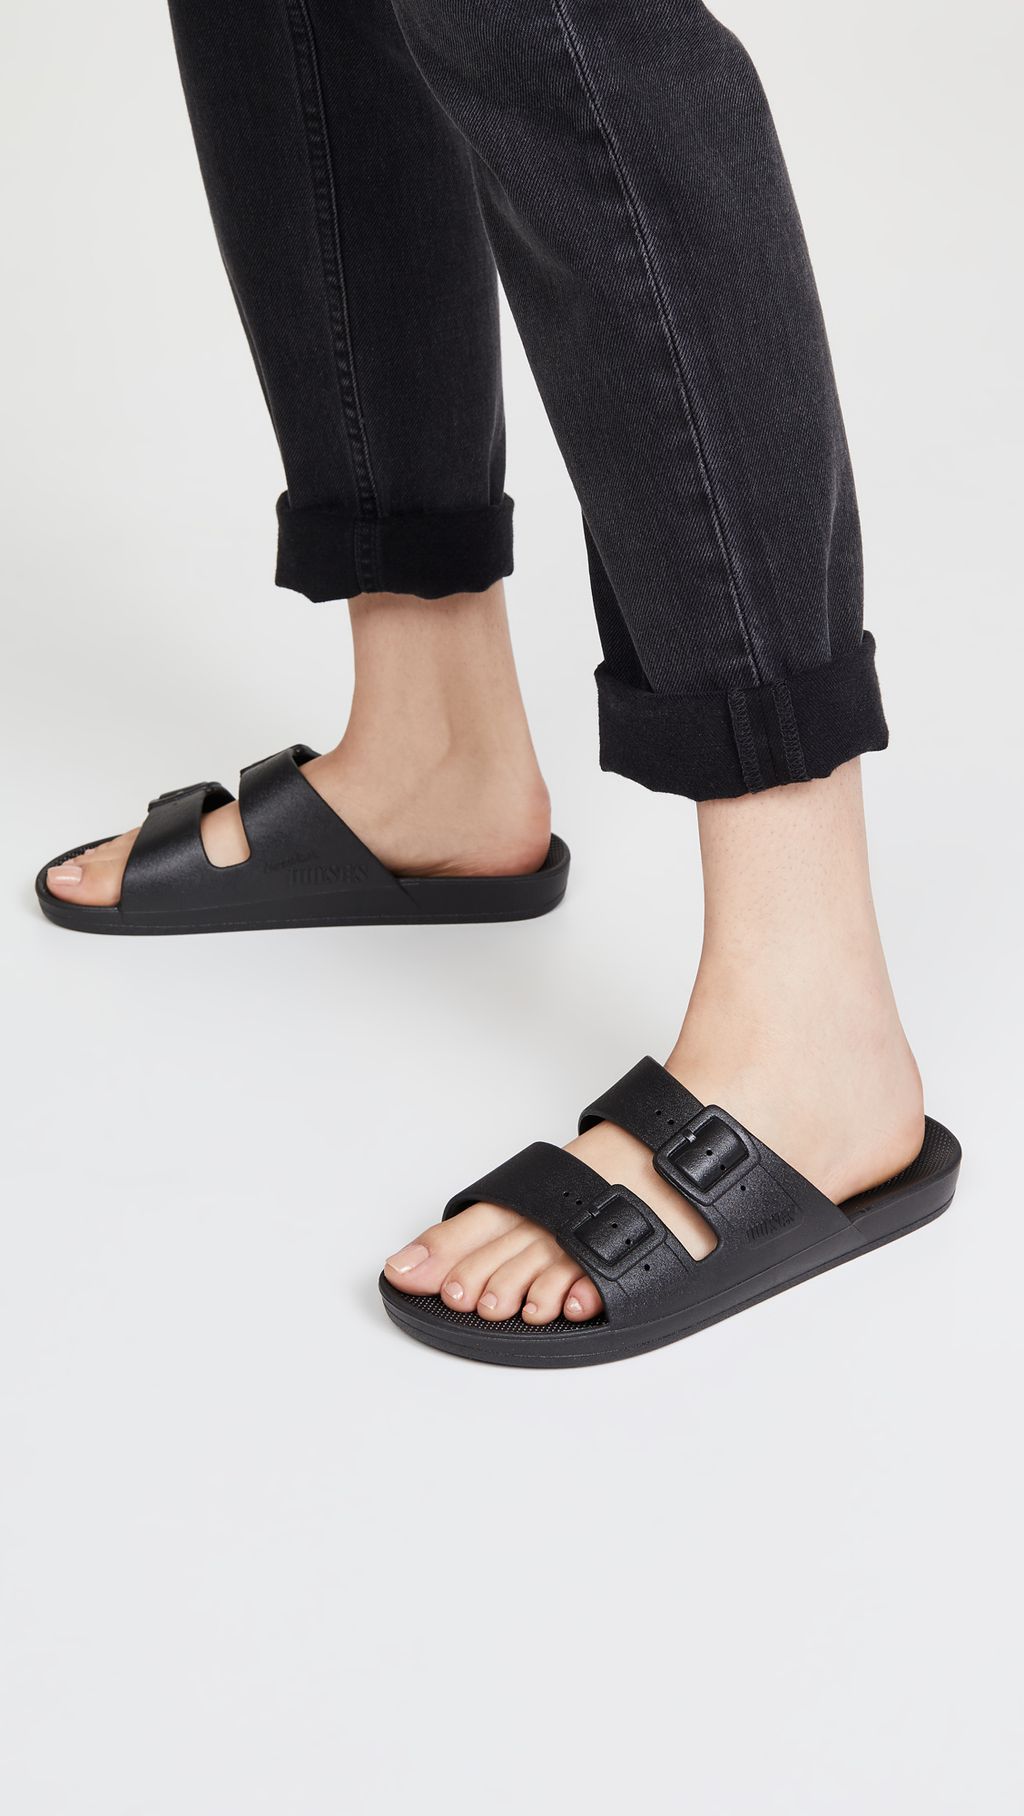 These Are the 24 Best Birkenstocks for Women | Who What Wear